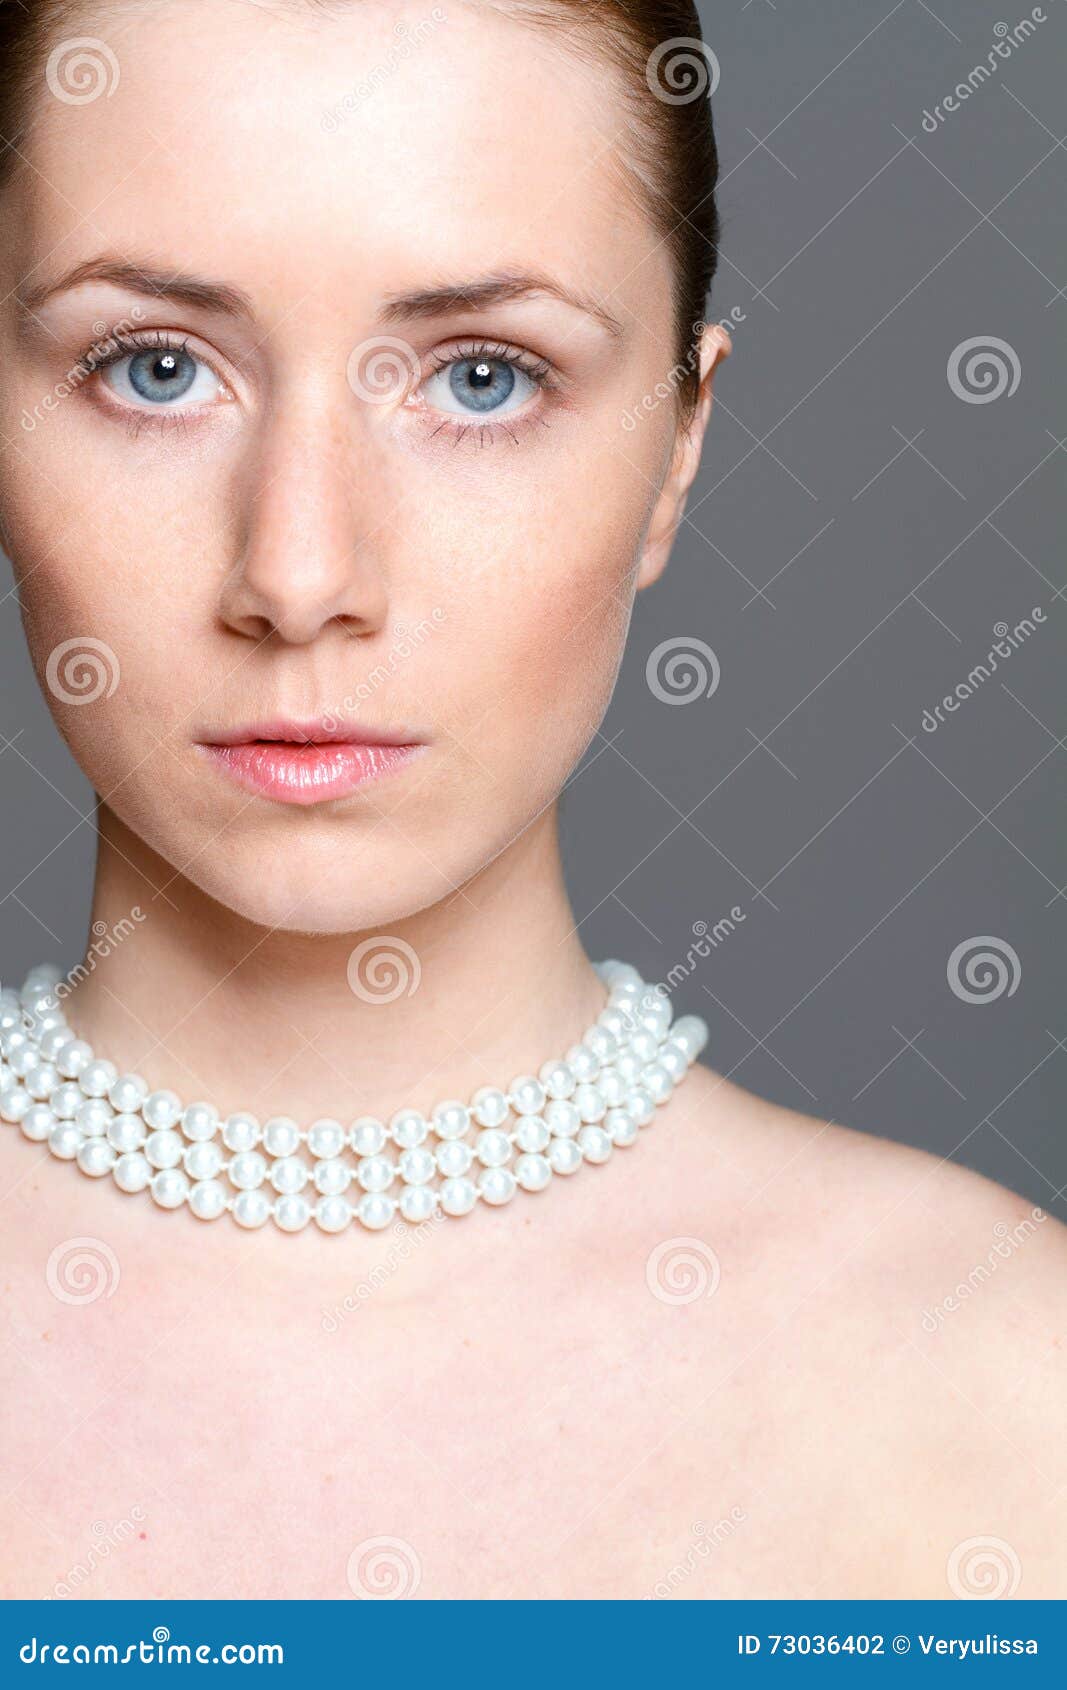 Beautiful Woman with Clear Skin and Perl Nacklace Stock Photo - Image of  fashion, natural: 73036402